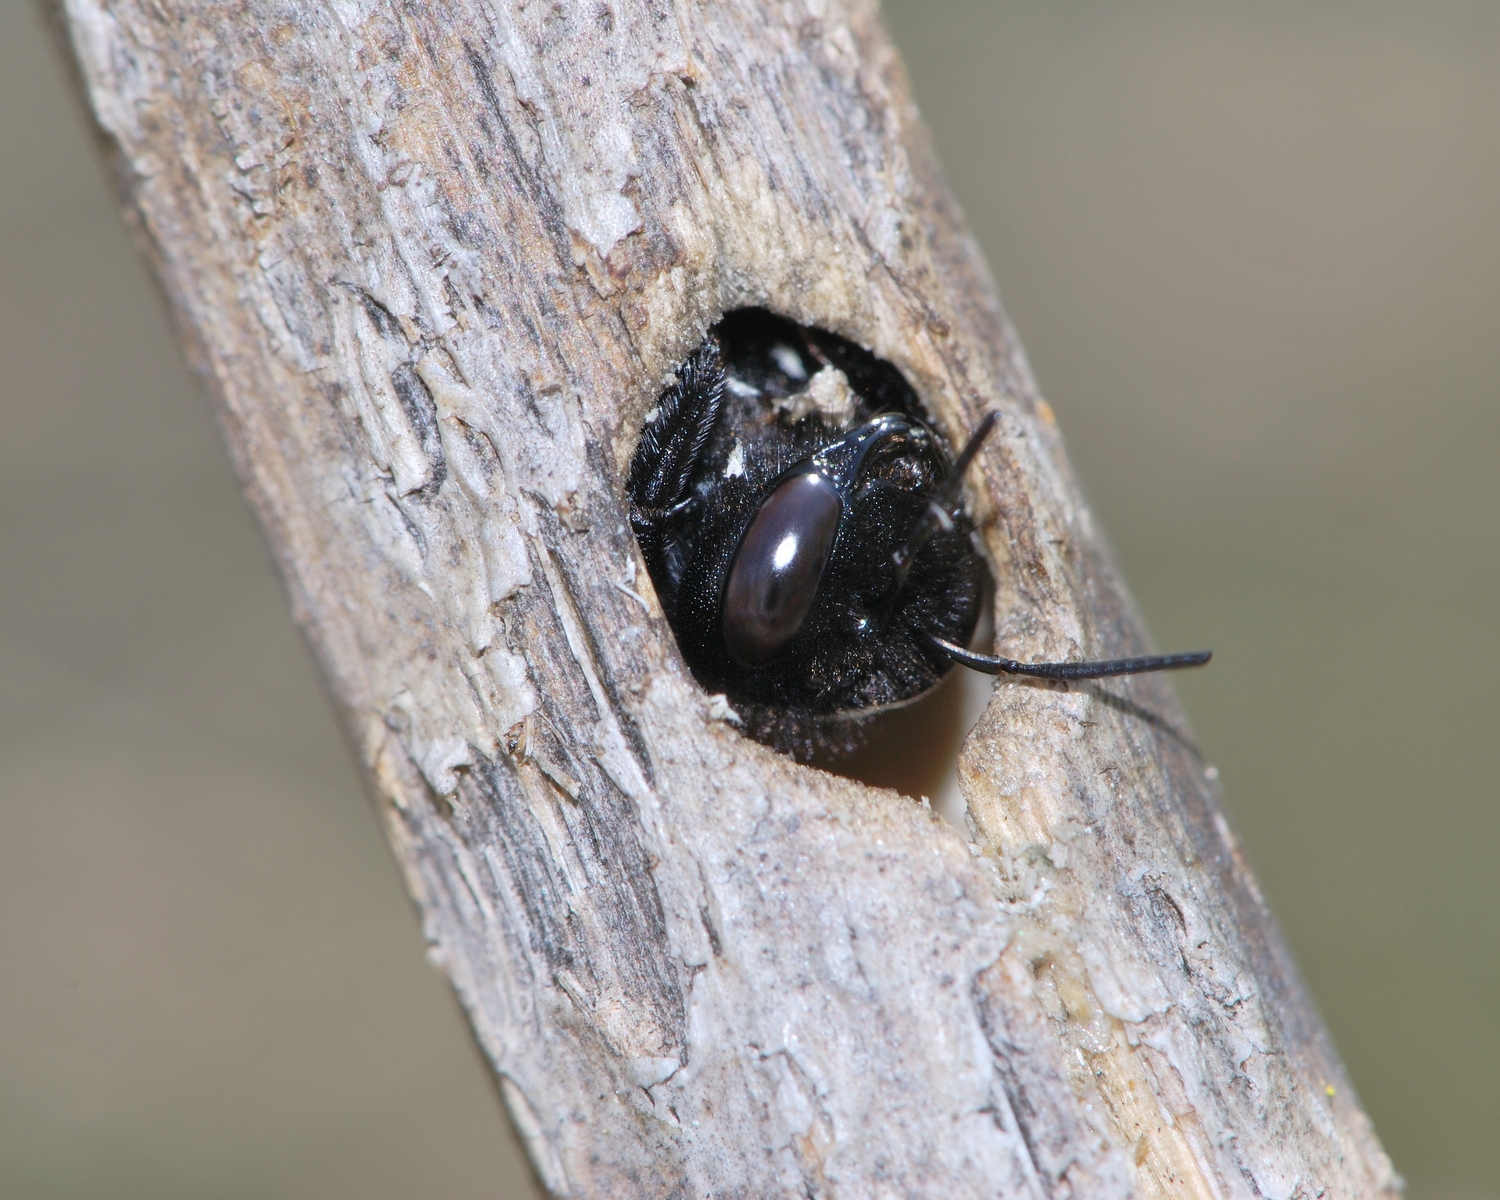 Many solitary bee species overwinter in hollow stems.  GIDEON PISANTY, CC BY-SA 3.0 DEED